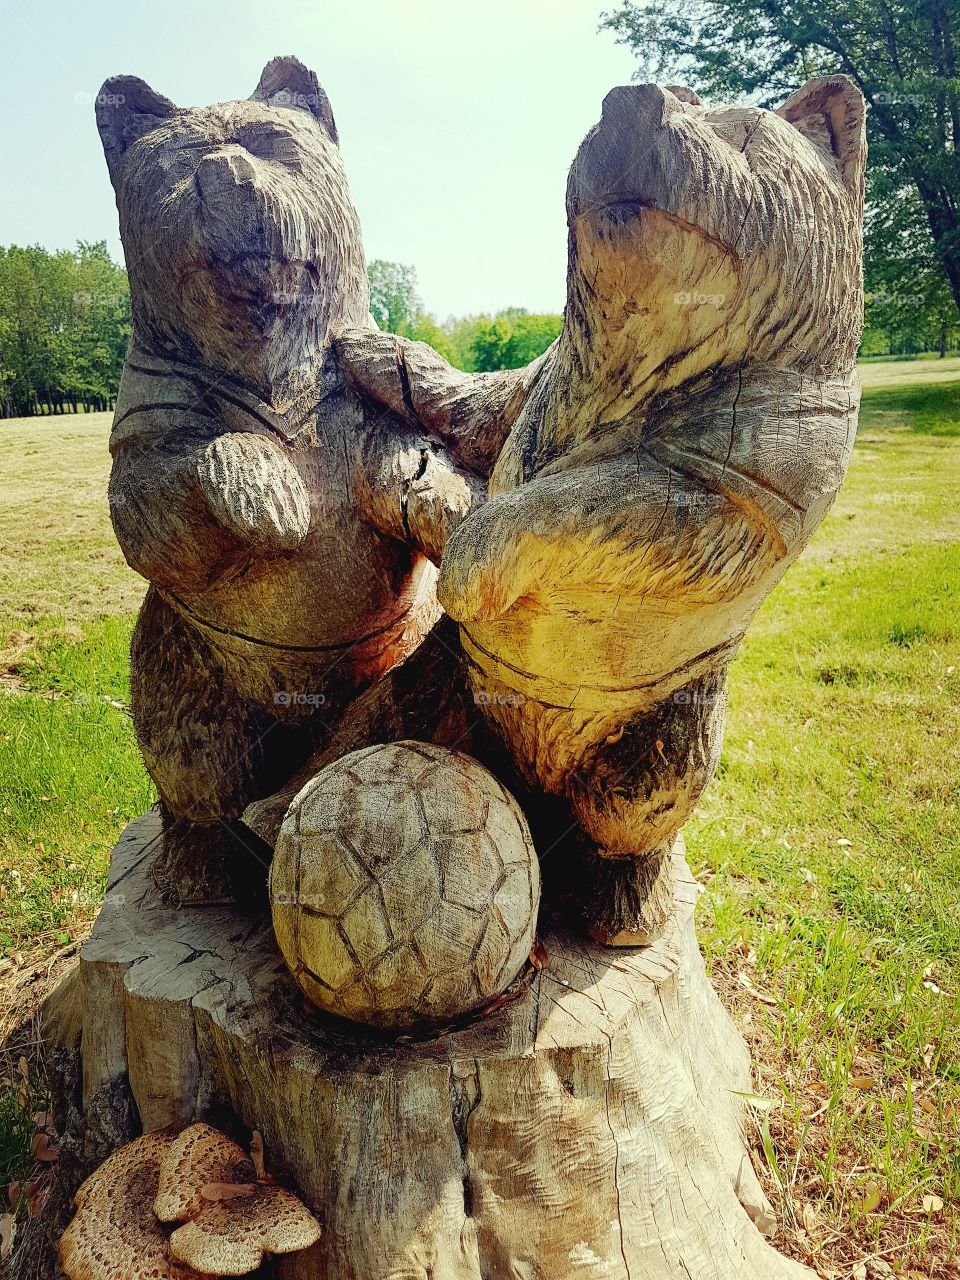 A wood carving of two bears playing soccer.